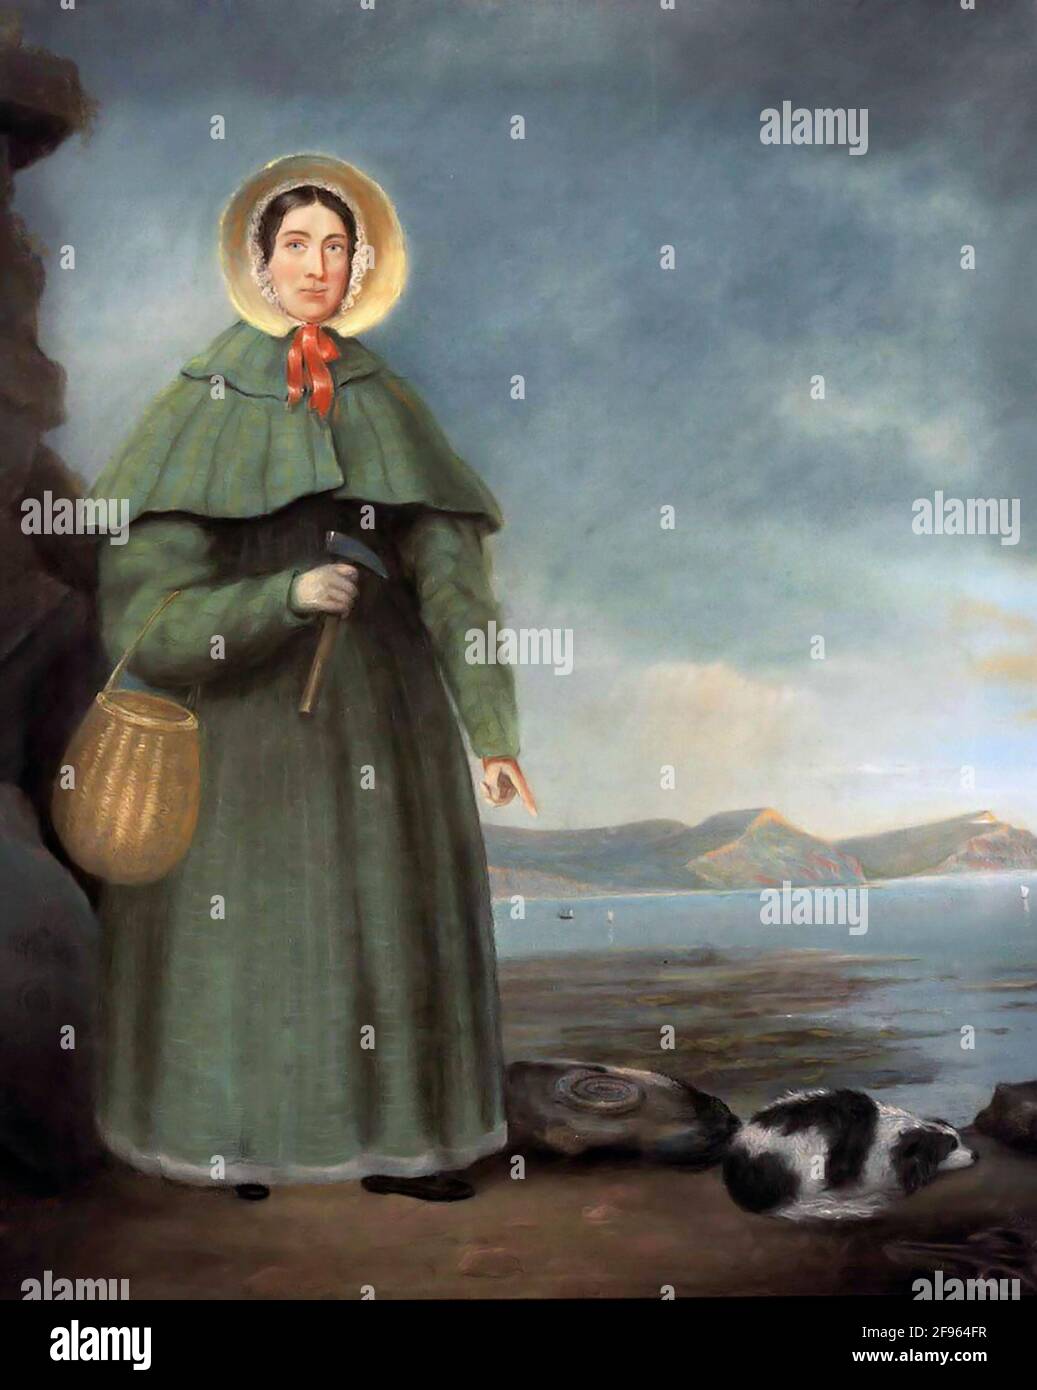 Mary Anning. Portrait of the English fossil collector and paleontologist, Mary Anning (1799-1847), copy of an 1842 portrait. Stock Photo